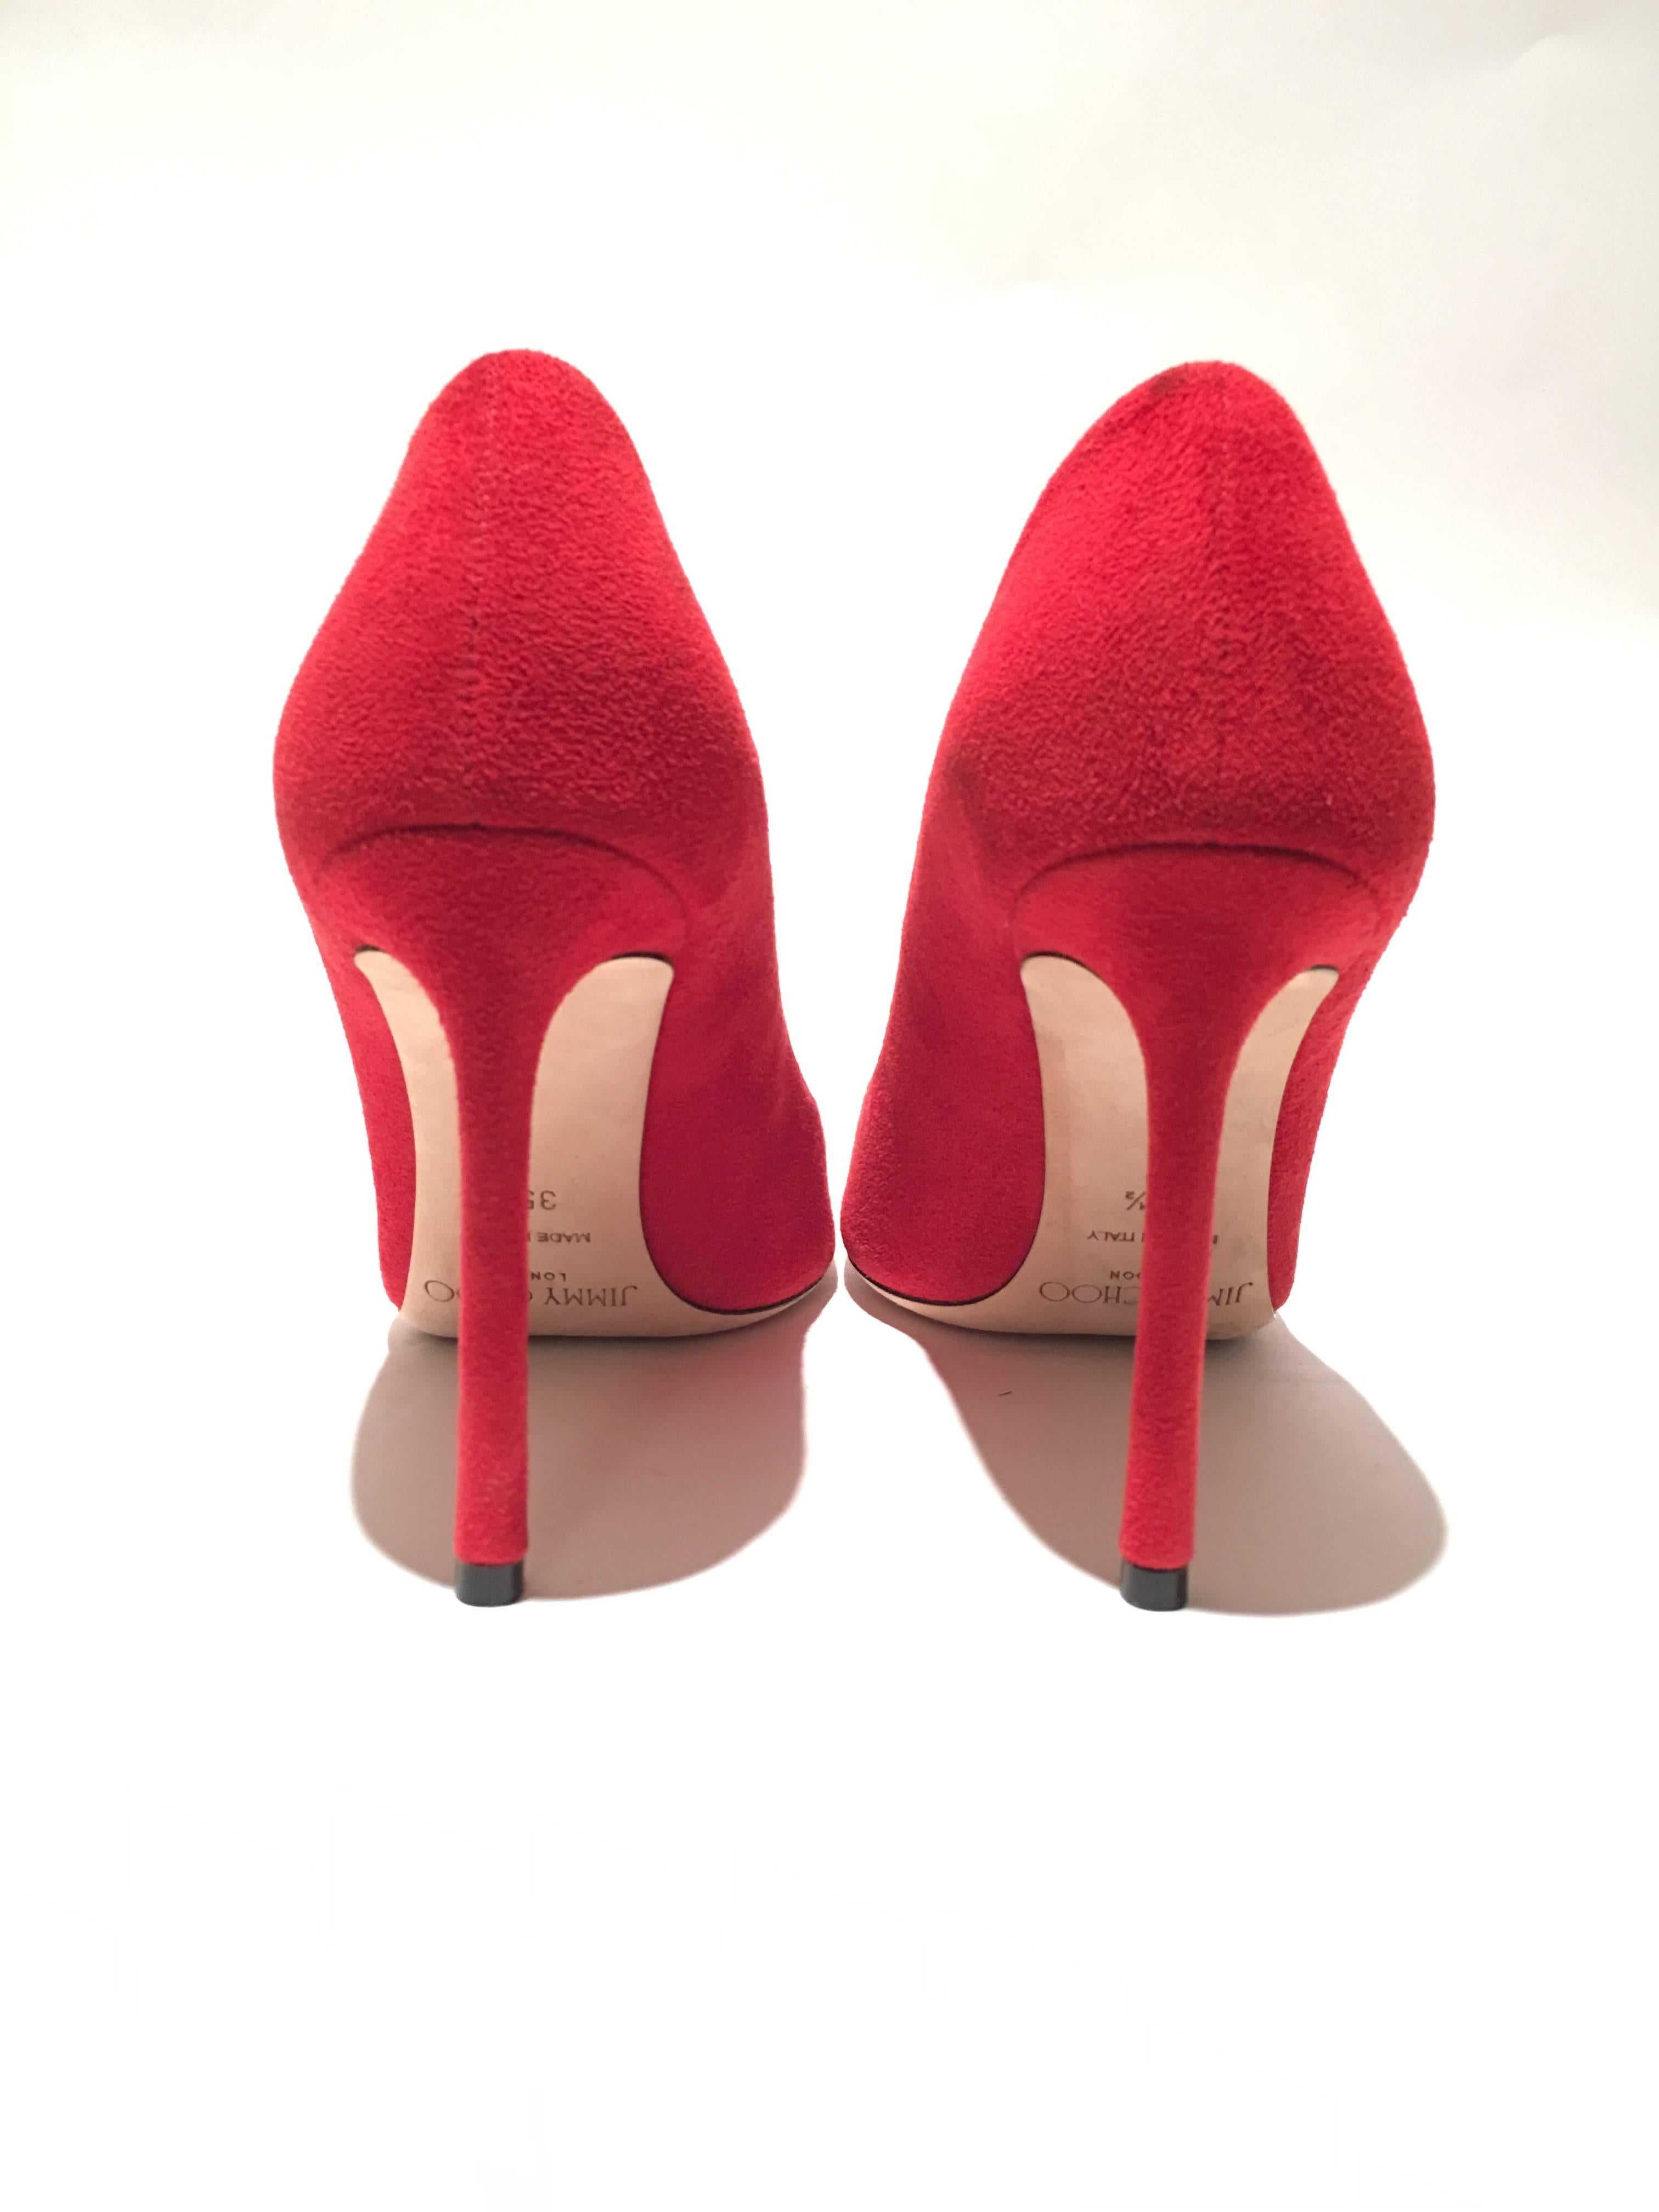 Jimmy Choo London Red Suede Pumps In Good Condition For Sale In Los Angeles, CA